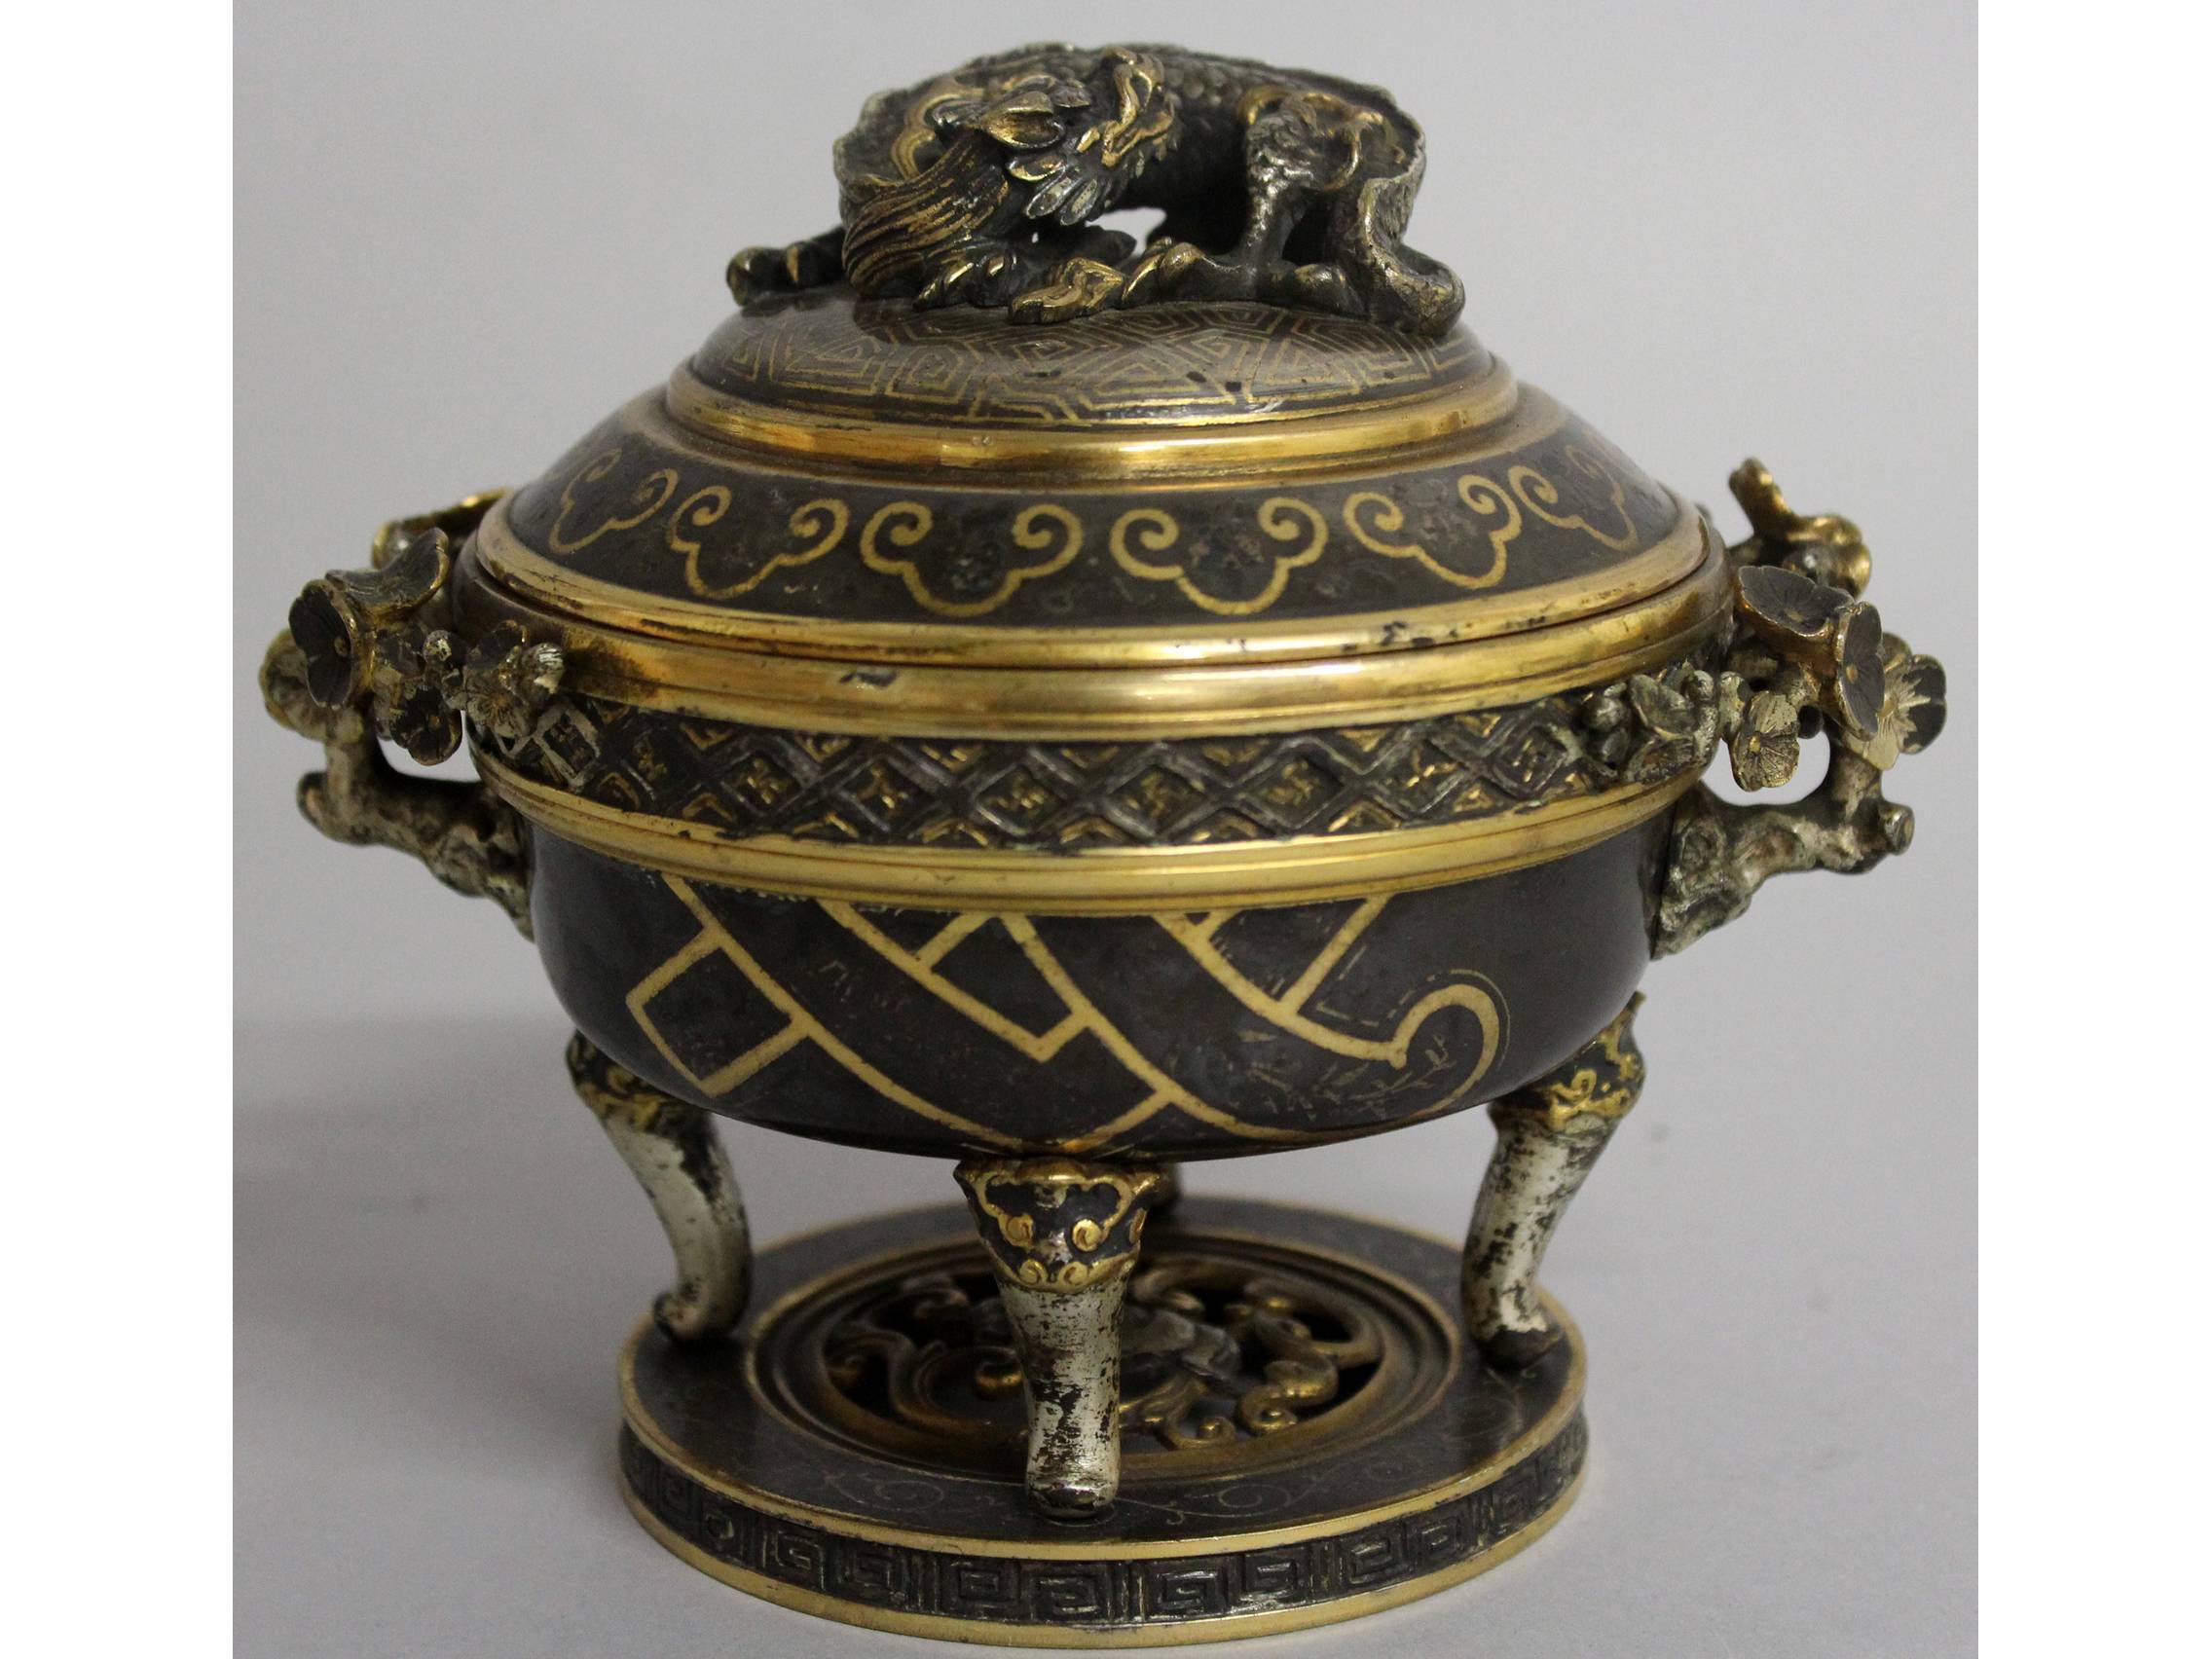 A SUPERB 19TH CENTURY FRENCH CIRCULAR BRONZE KORO AND COVER in the Japanese STYLE, the lid with a